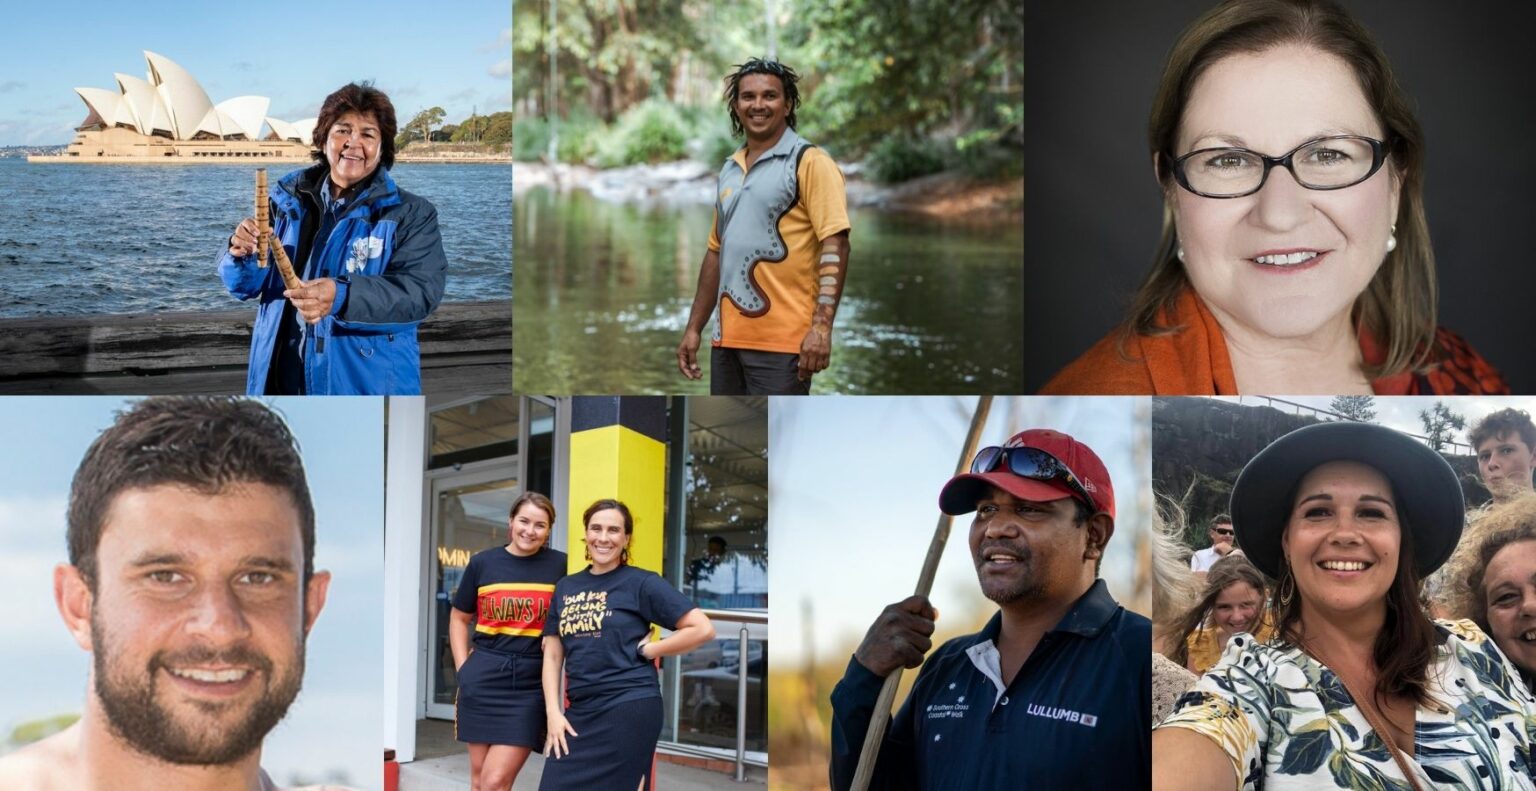 Meet the Brave Faces and Change-Makers this National Reconciliation Week